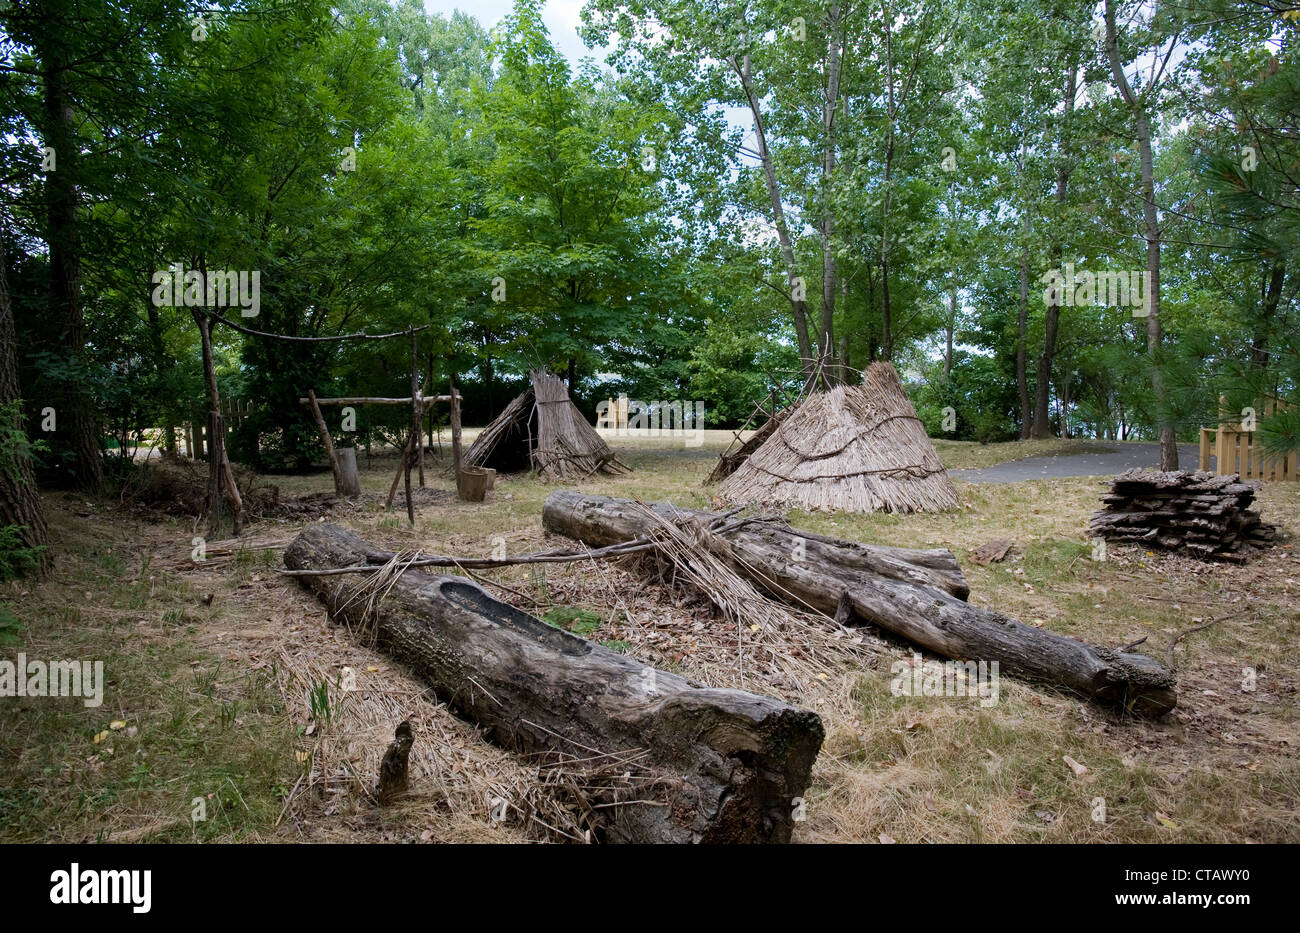 Replica Iroquois hunting reed huts and encampment. Stock Photo